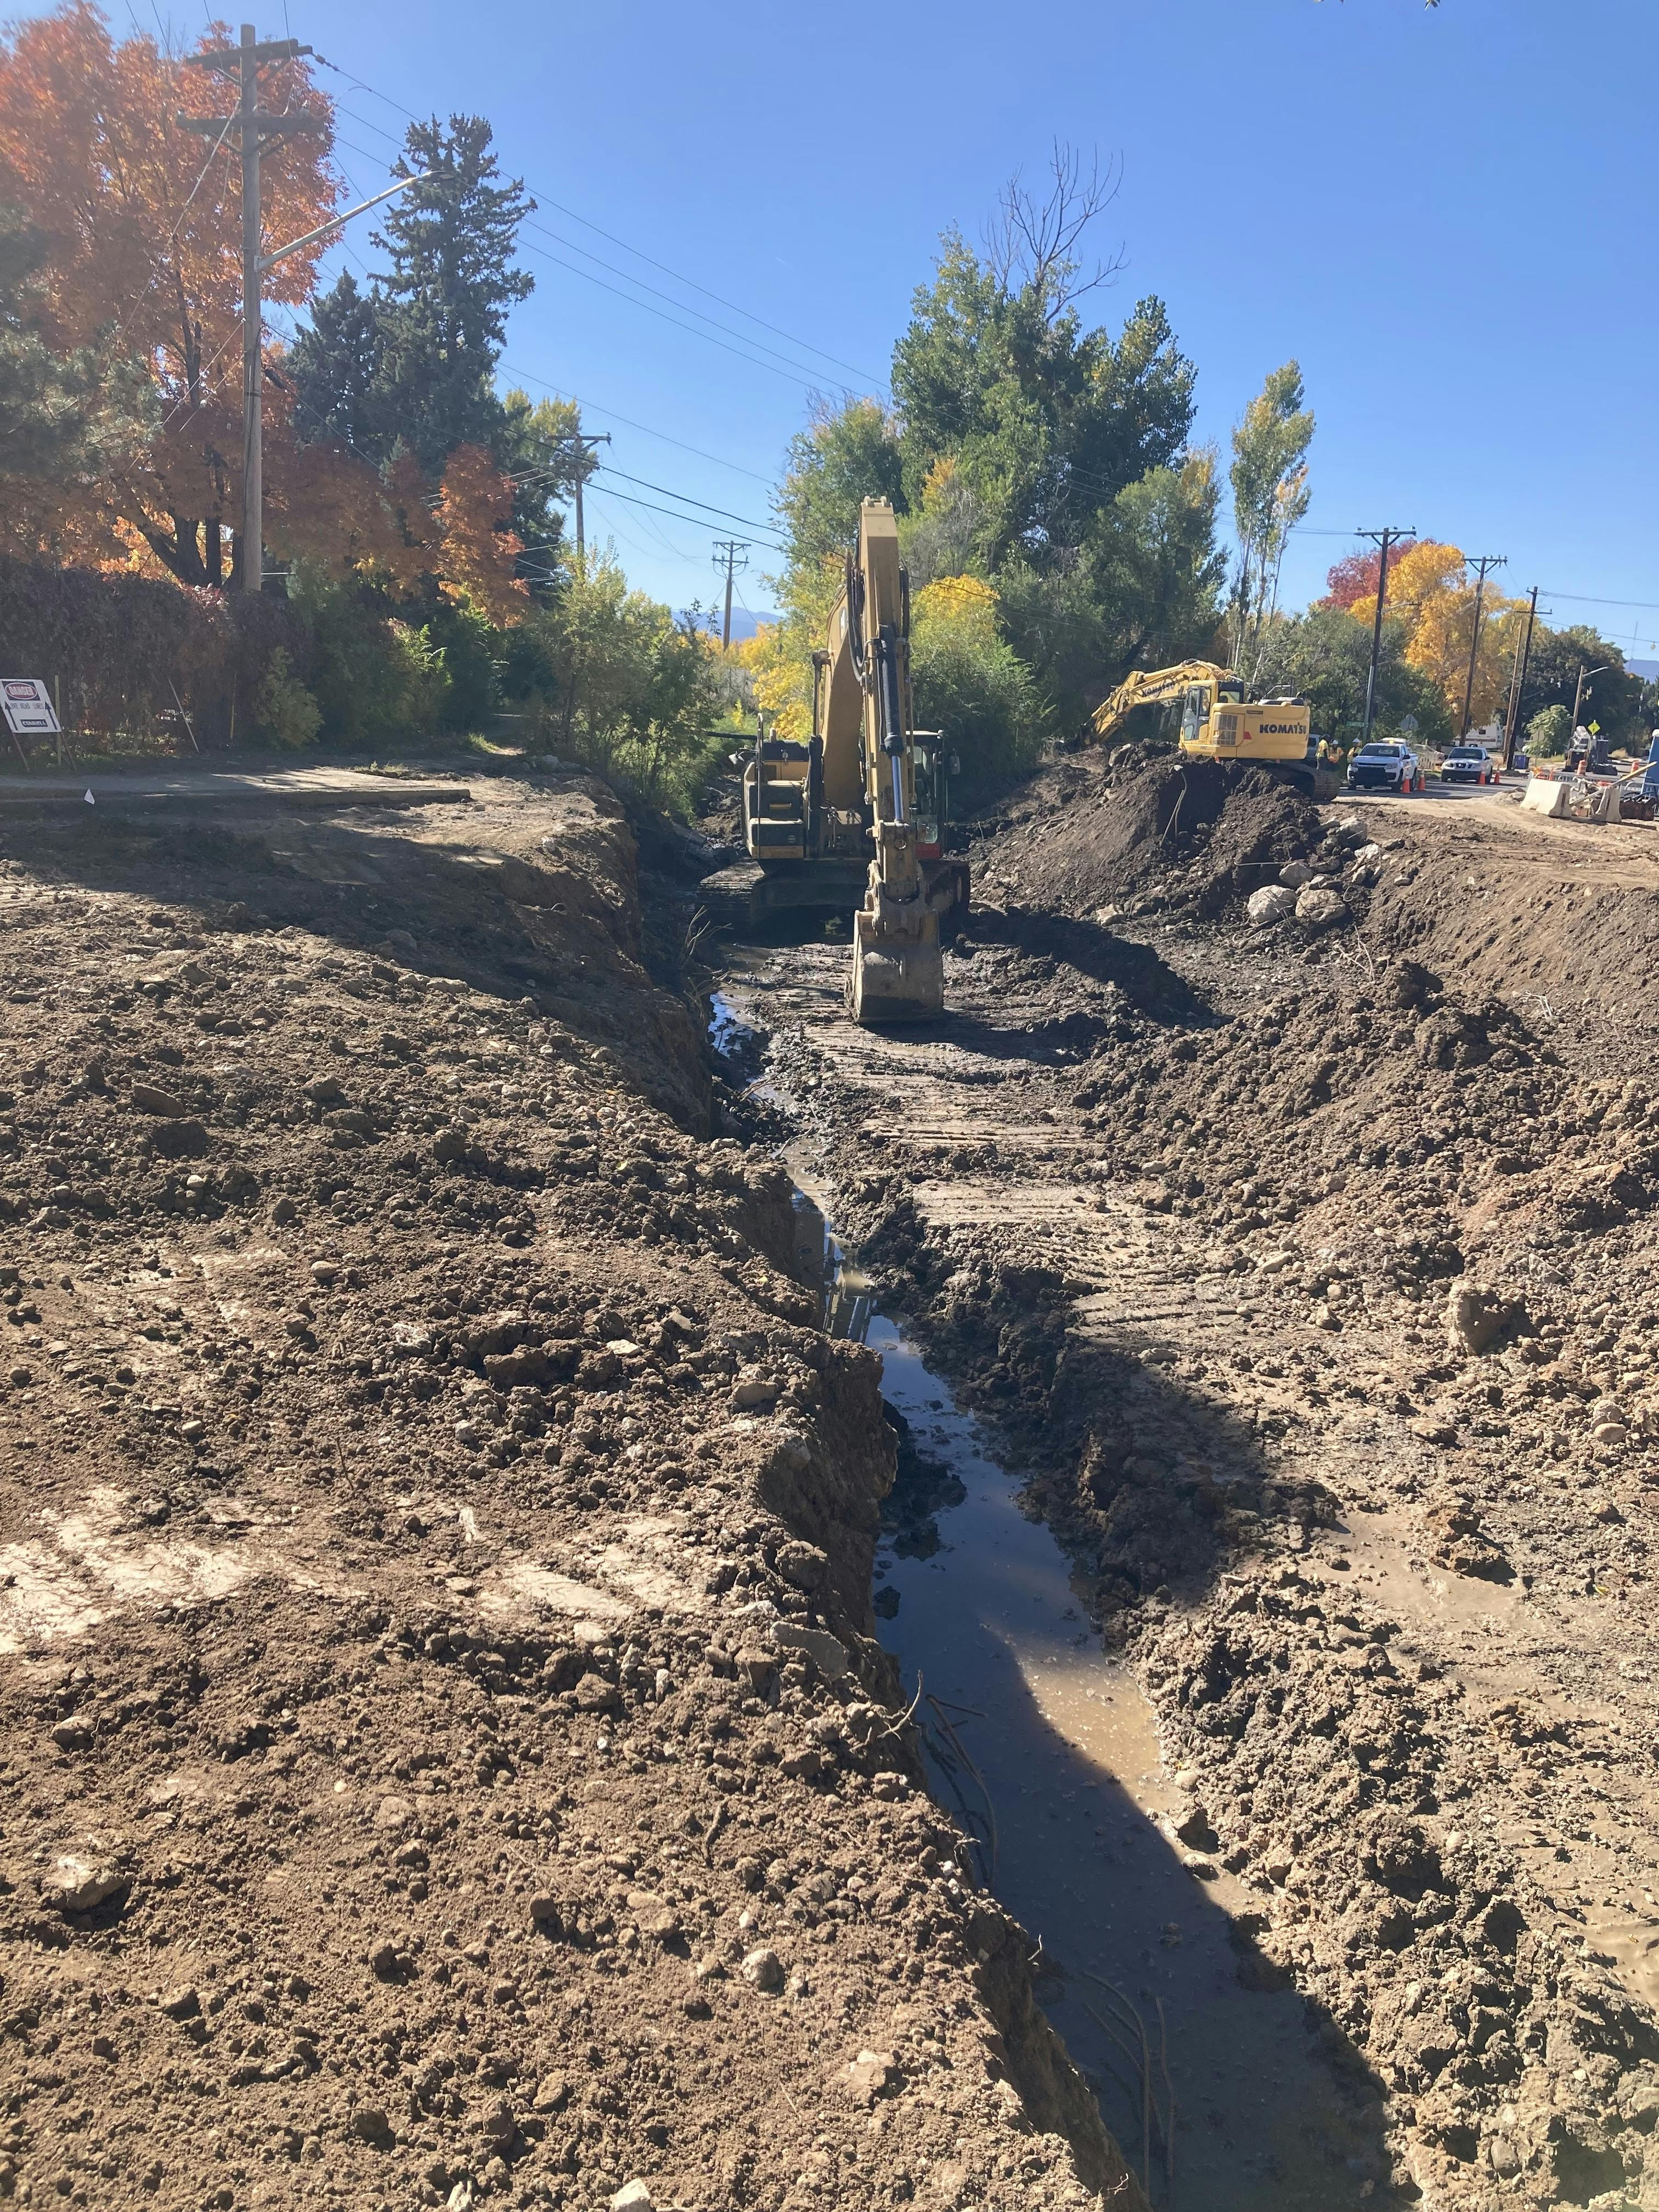 October 2022 - Crews work to clean up and set new bridge piers in the Greeley Loveland Irrigation Canal.